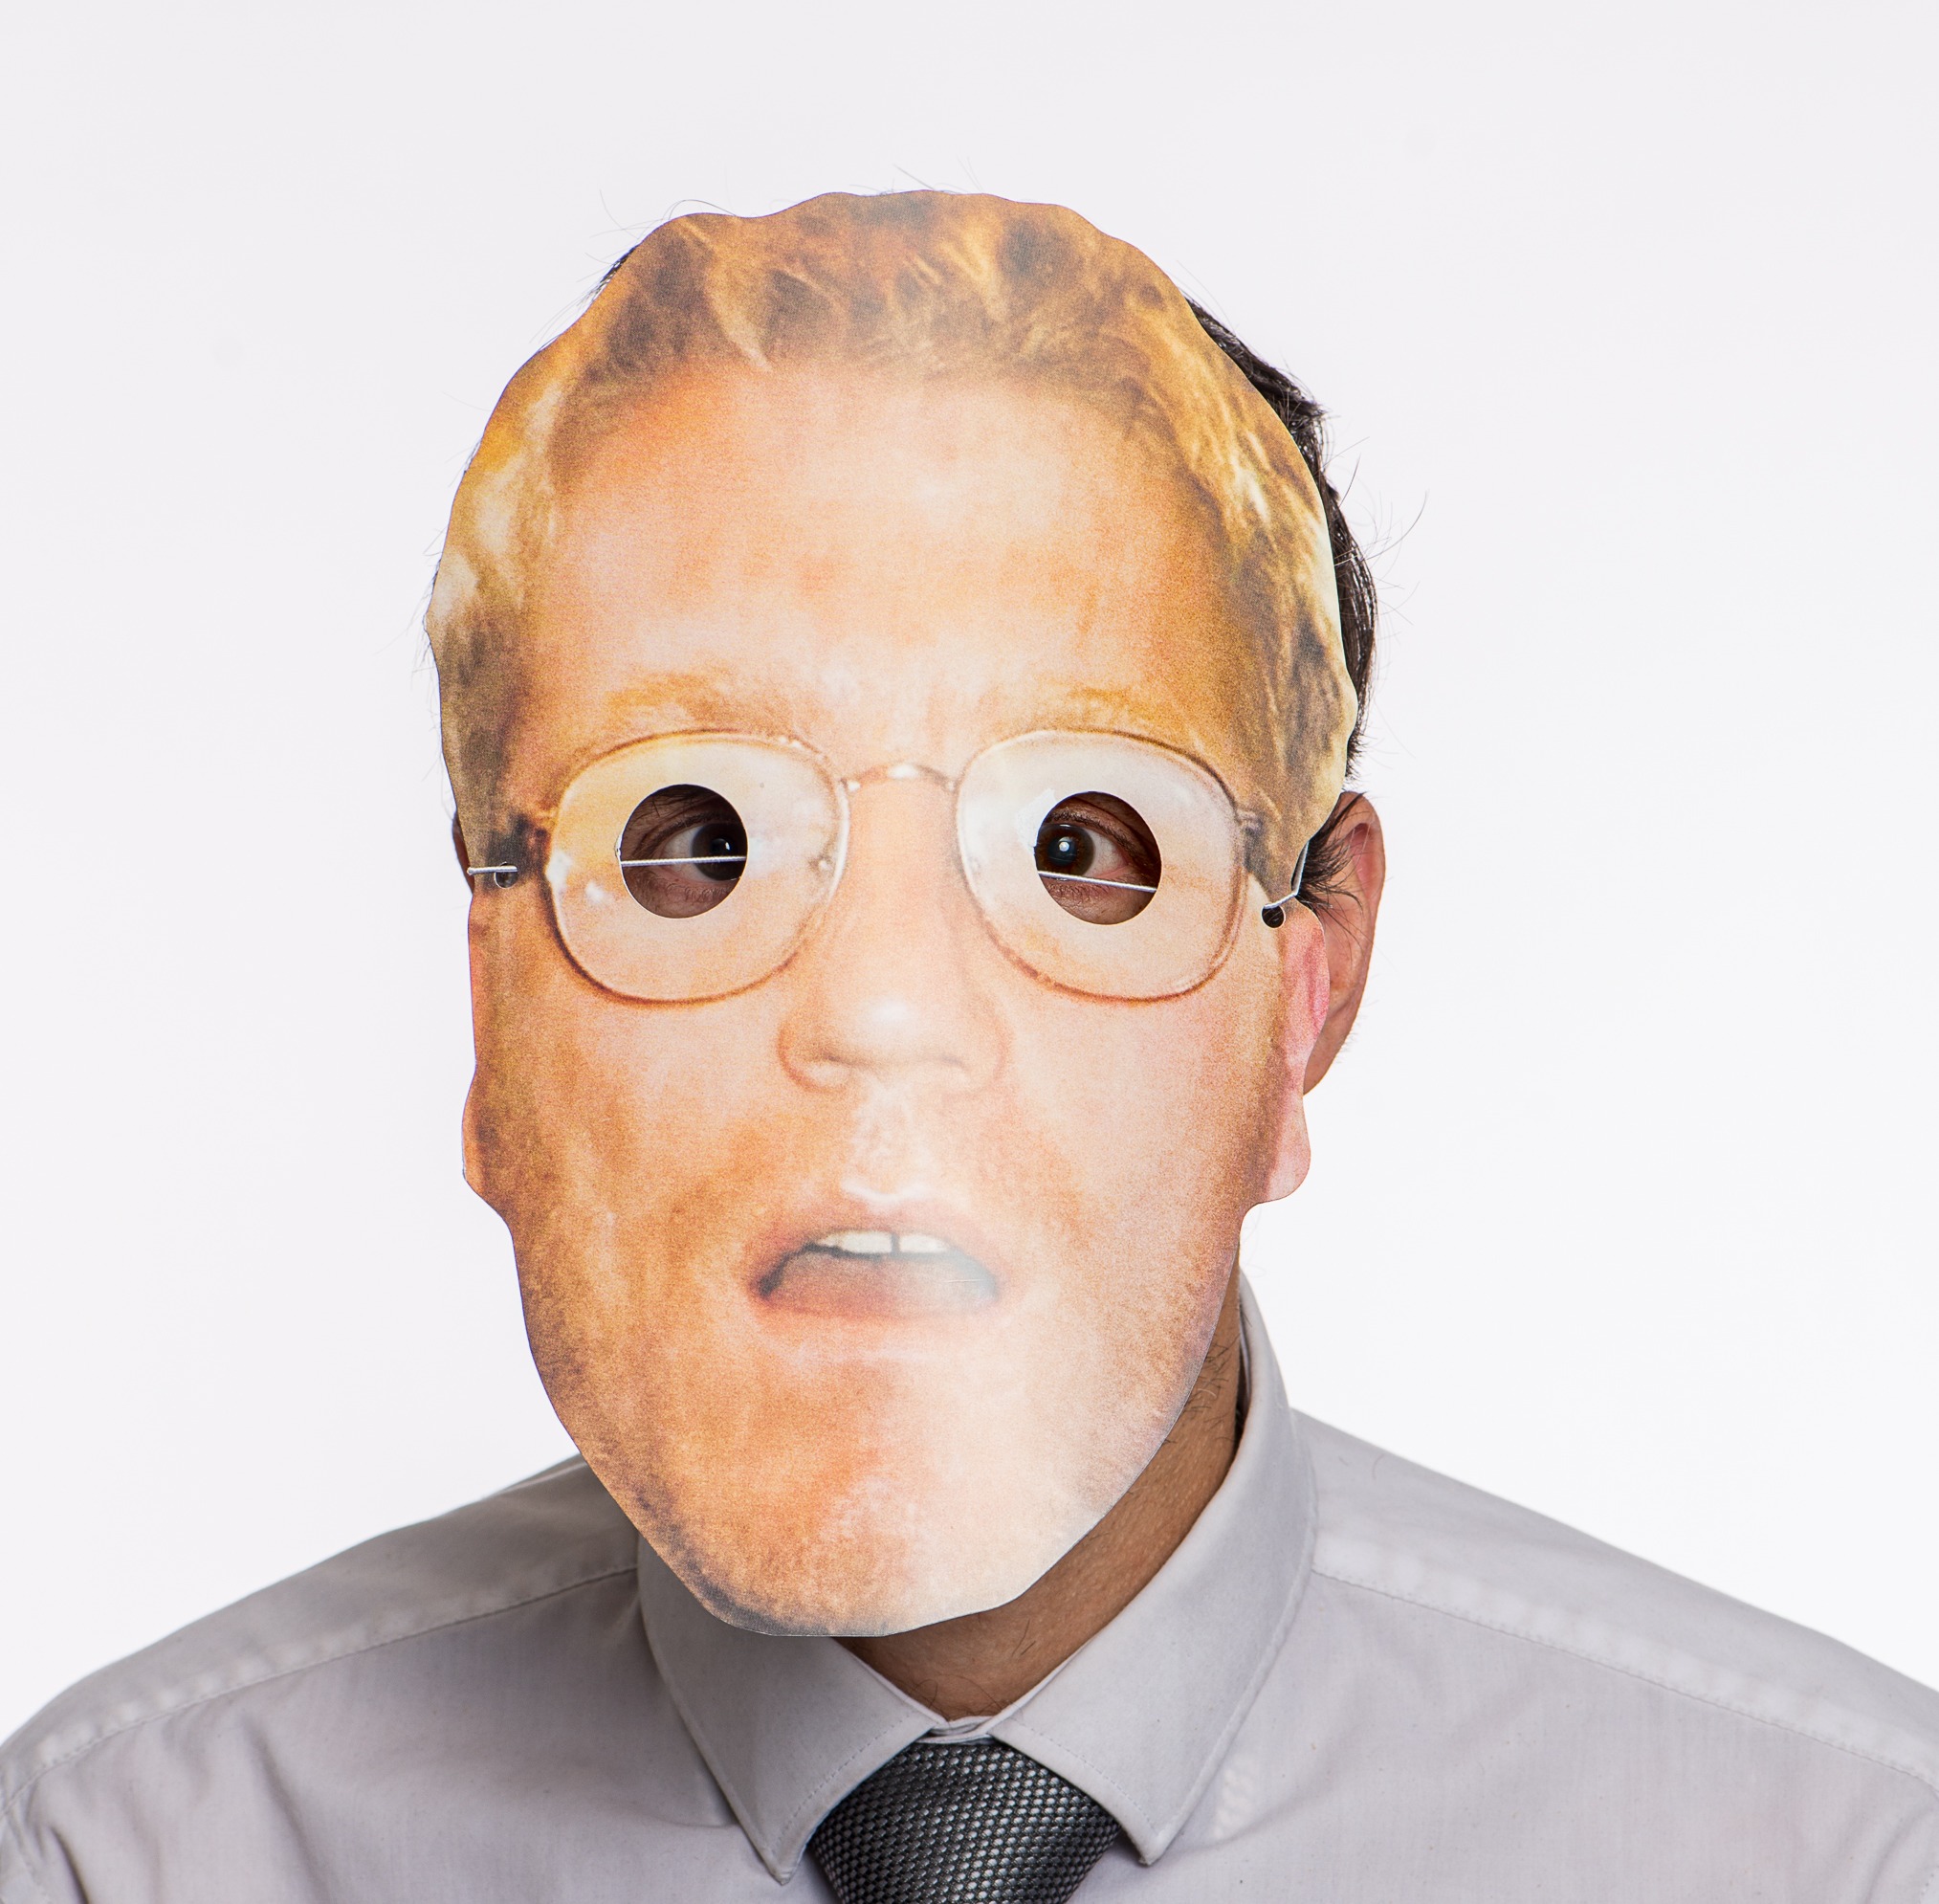 At Wembley Stadium earlier this month, the merch even included Darren masks made from an old image of the blond bodyguard asleep on the tour bus